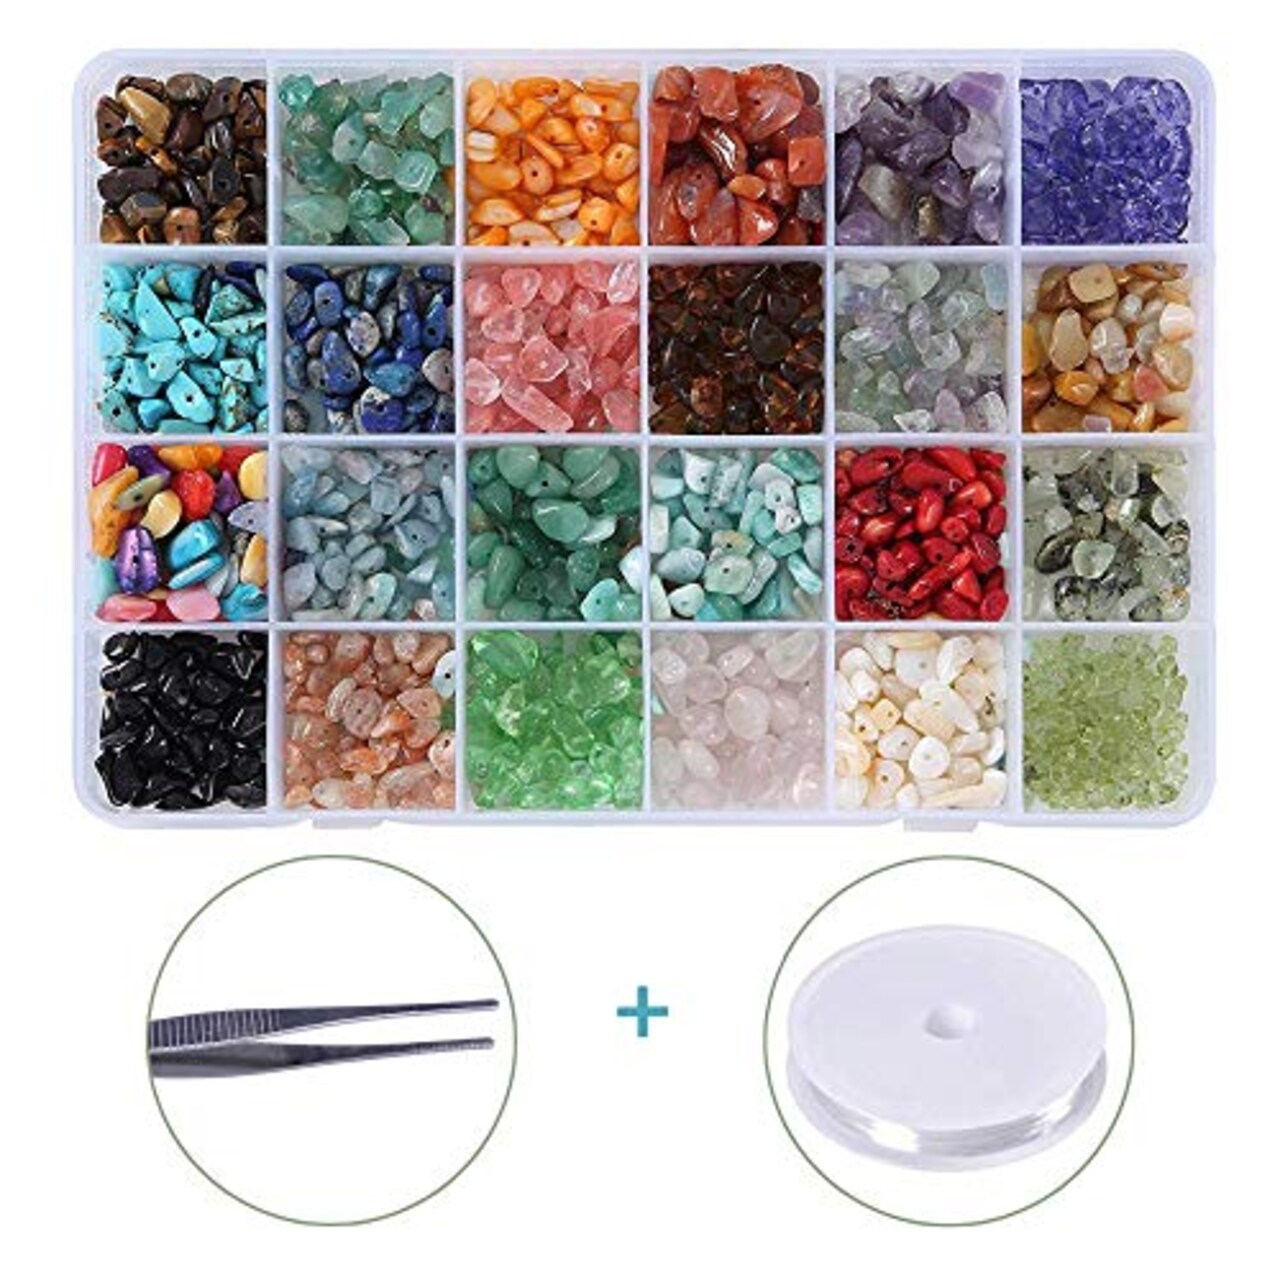 Efivs Arts 1500PCS Stone Beads, Crystal Beads Ring Making Kit Gemstone  Beads Set 24 Styles Crystal Pieces for Jewelry Making Crushed Chunked for  DIY Crafts for Holiday Gift